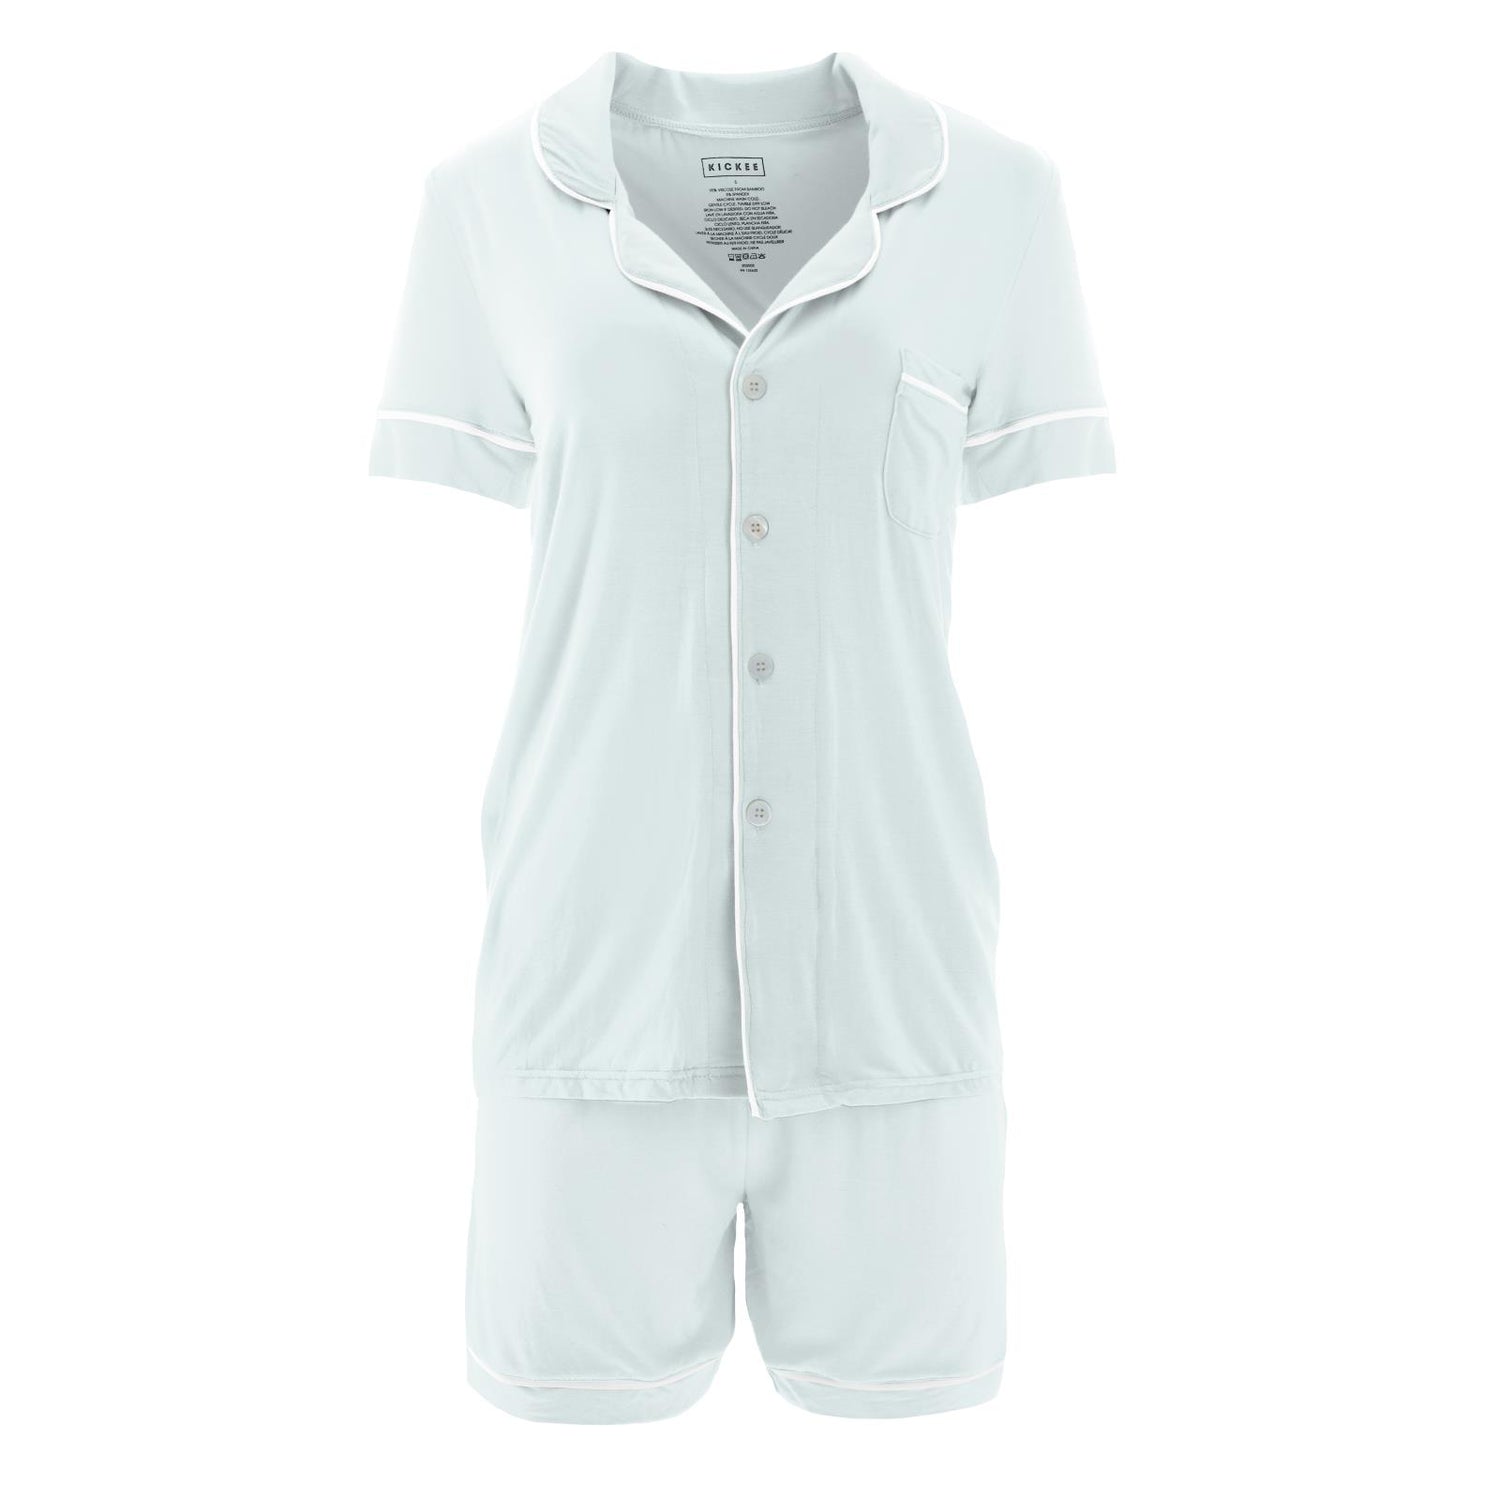 Women's Short Sleeve Collared Pajama Set with Shorts in Fresh Air with Natural